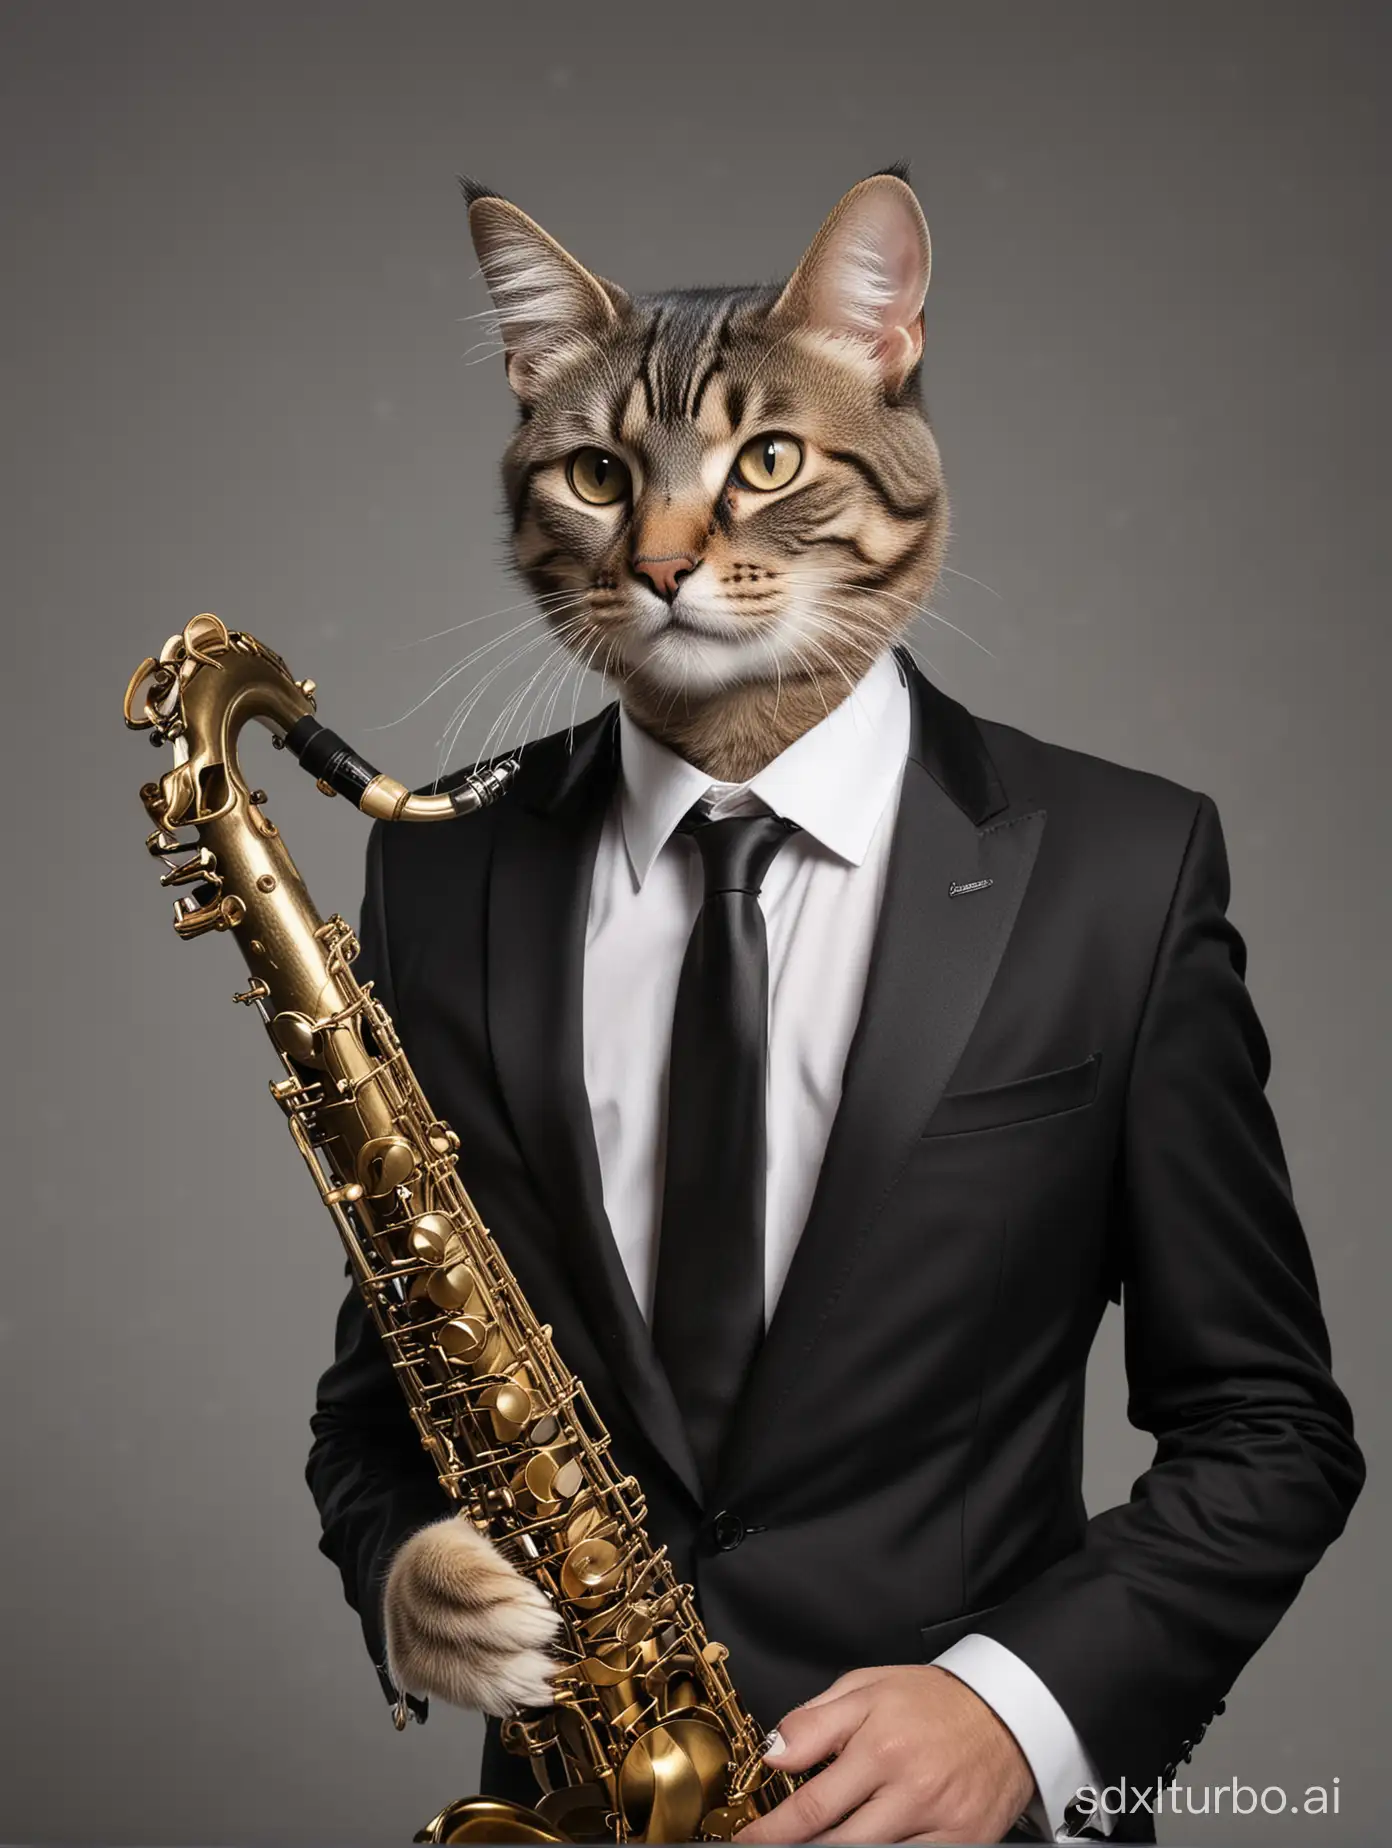 On a blank background is a full image of cat felinè wearing a black suit and tie while playing a shiny Jazz tenor saxophone. High resolution clean accurate photo image  rendering.